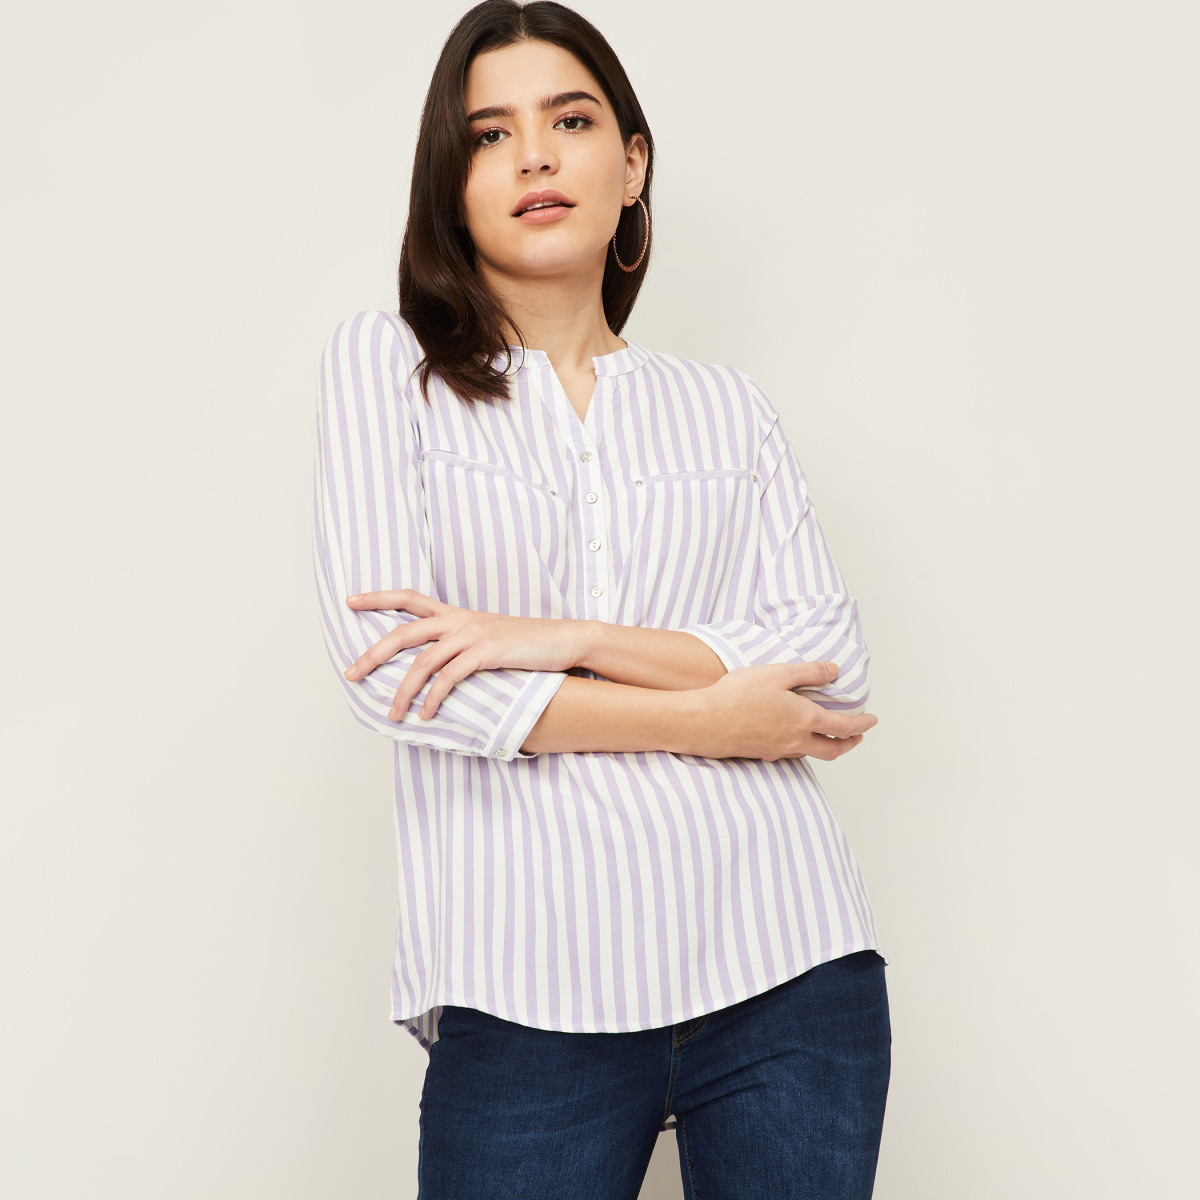 FAME FOREVER Women Striped Woven Top